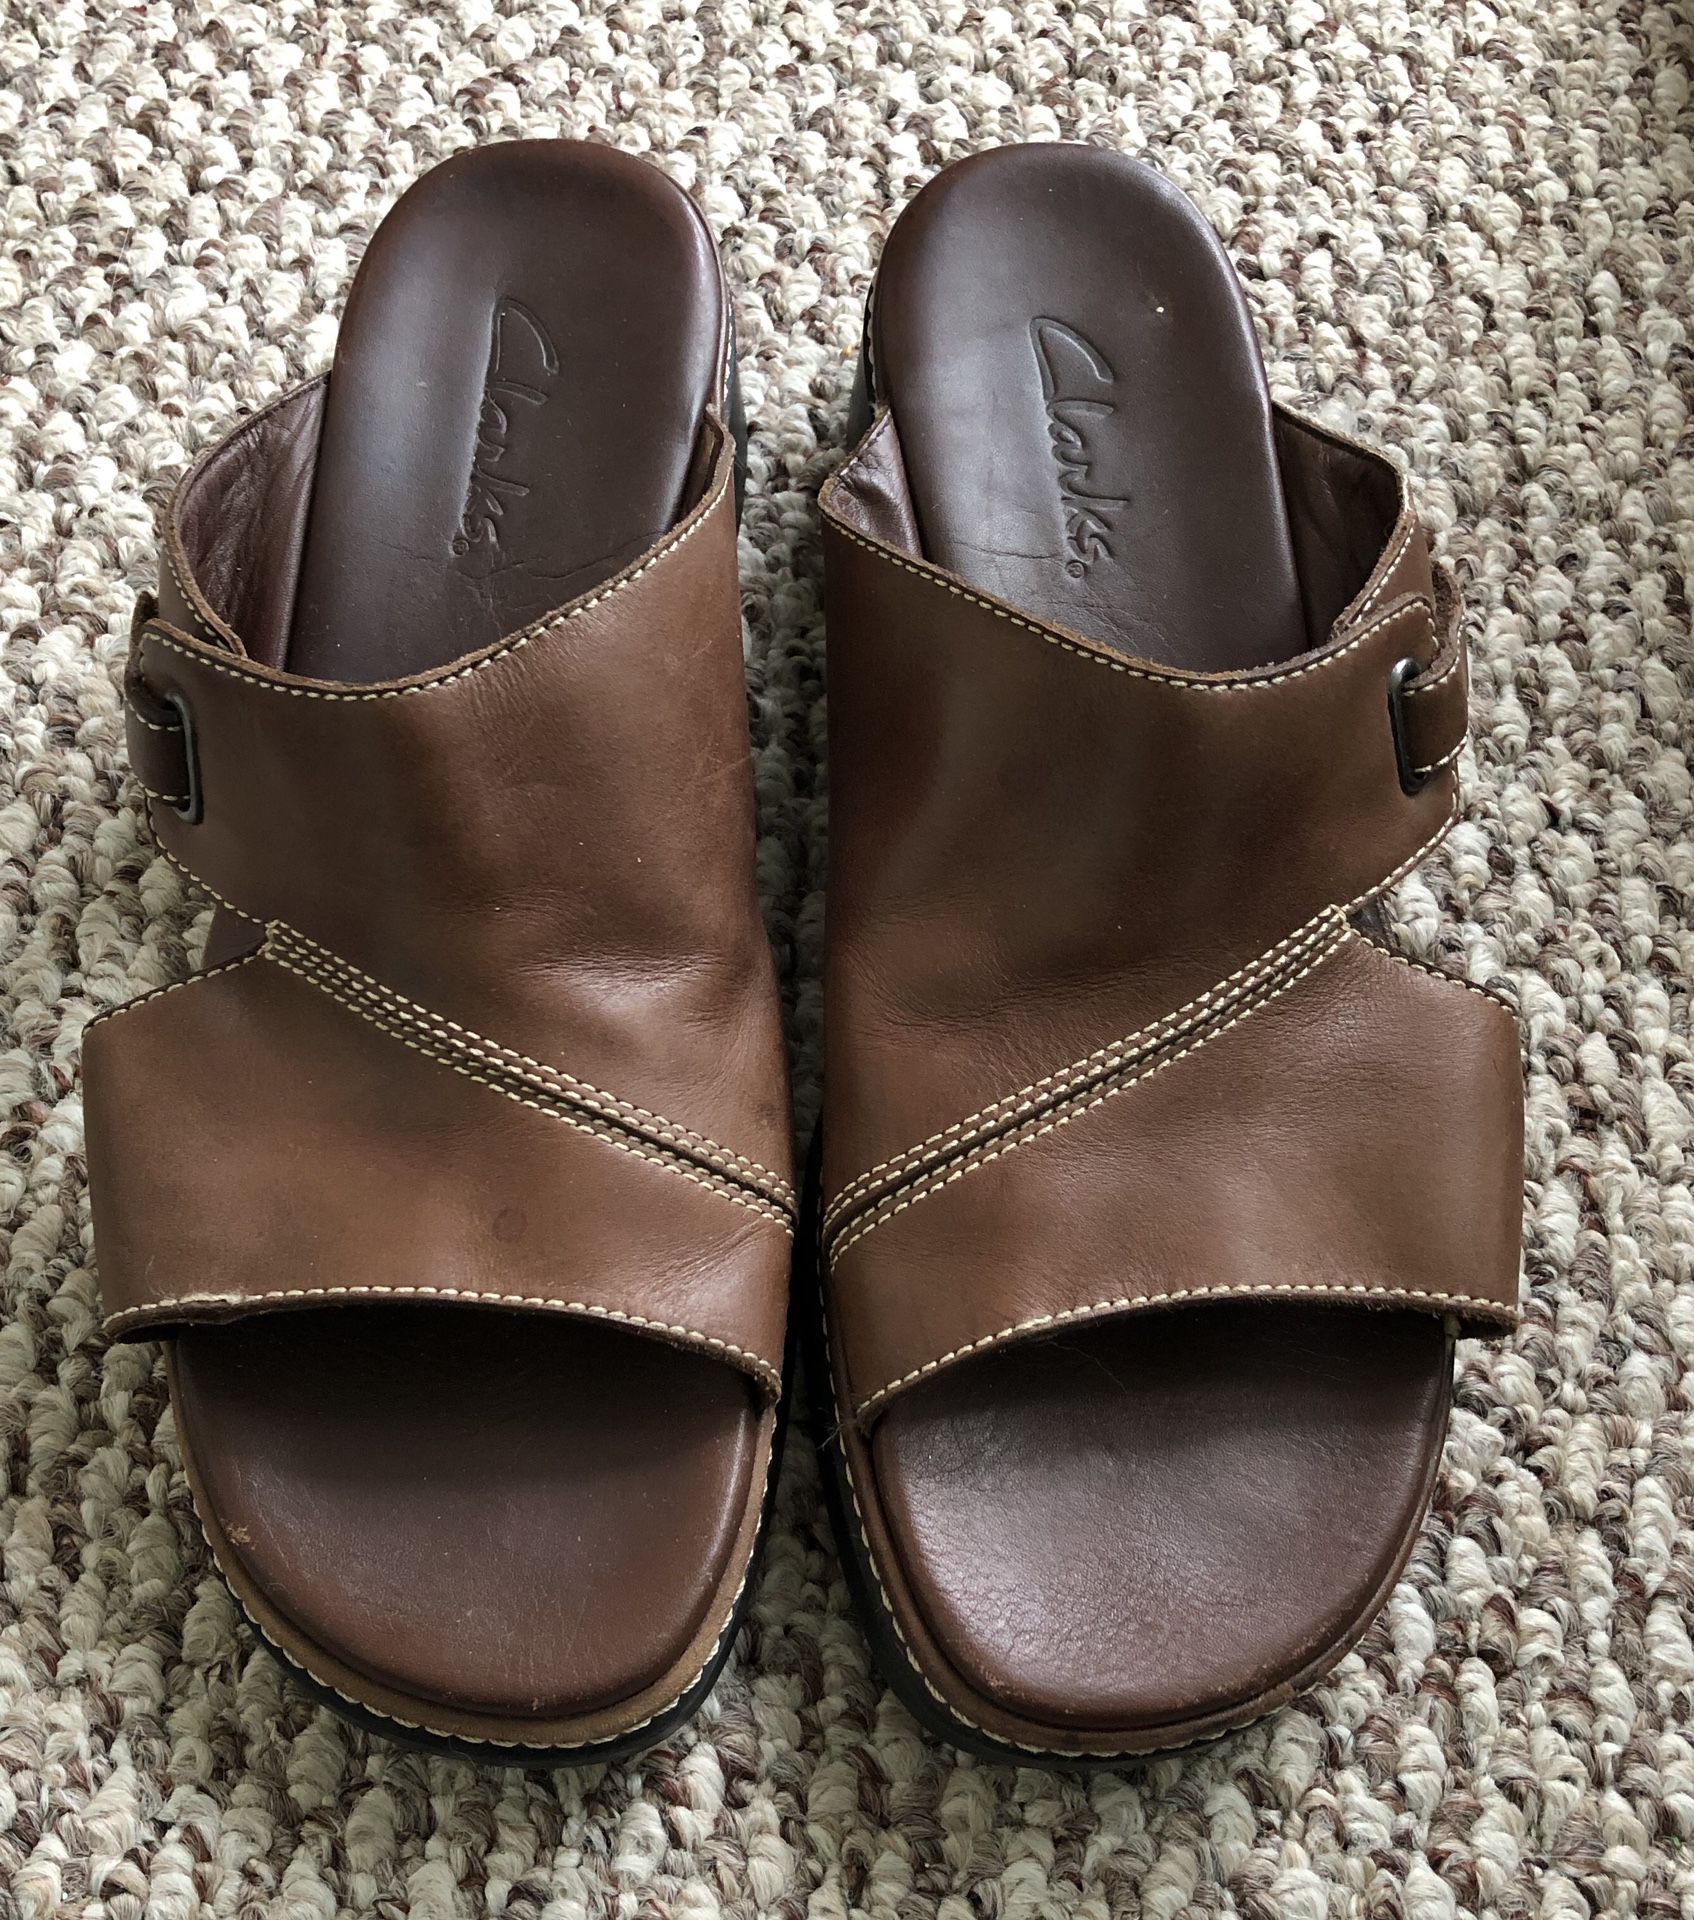 CLARKS Women’s Brown Leather Wedge Mule Sandal Size 9. Cushioned and comfortable. Smoke free home.